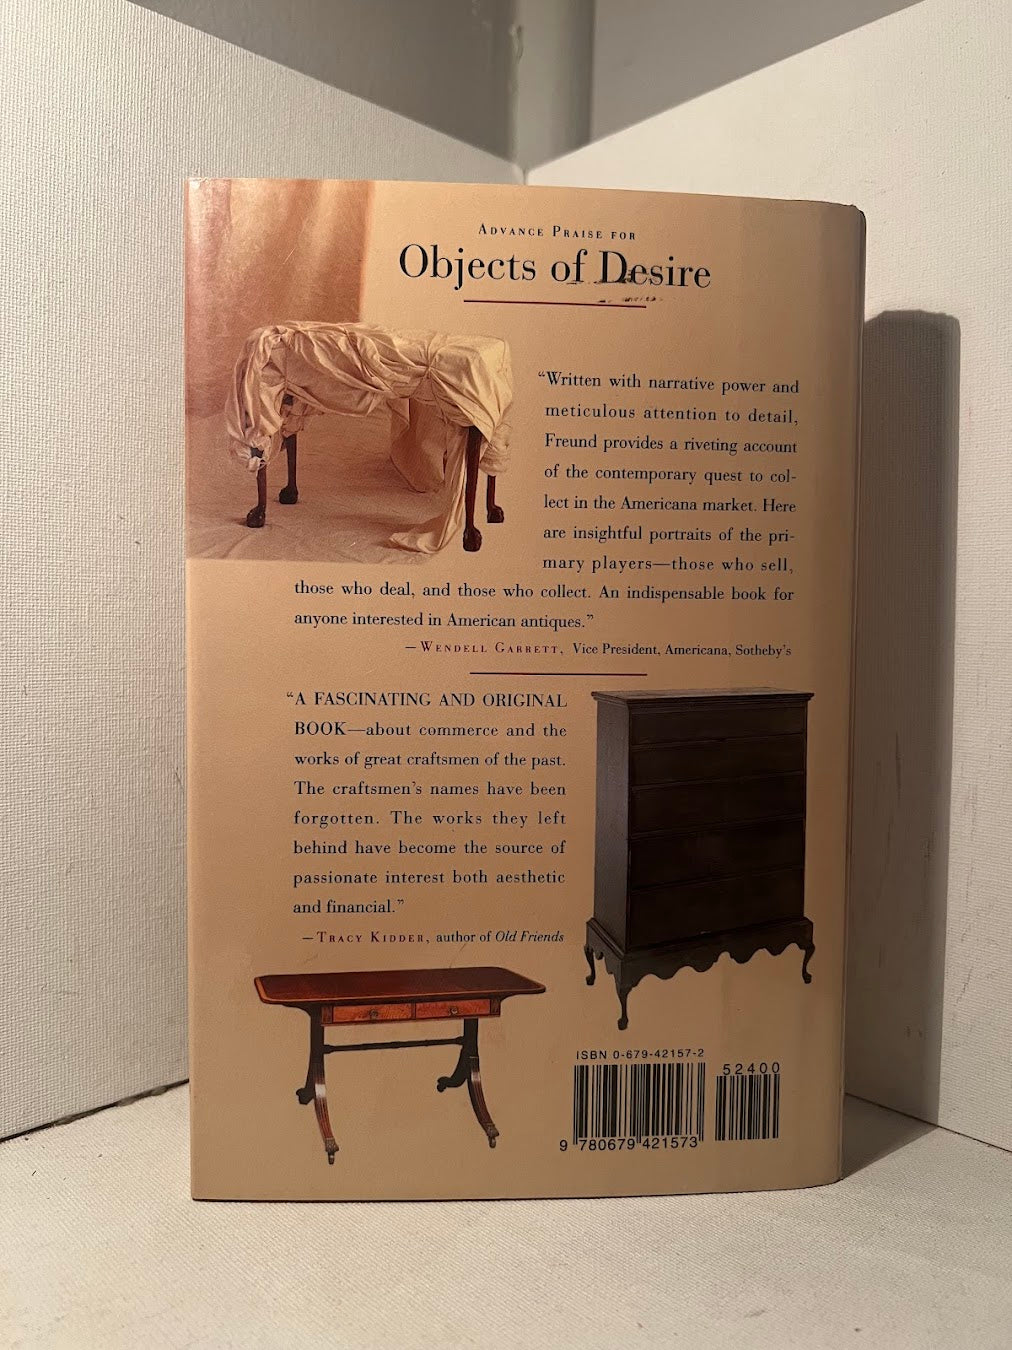 Objects of Desire: The Lives of Antiques and Those Who Pursue Them by Thatcher Freund